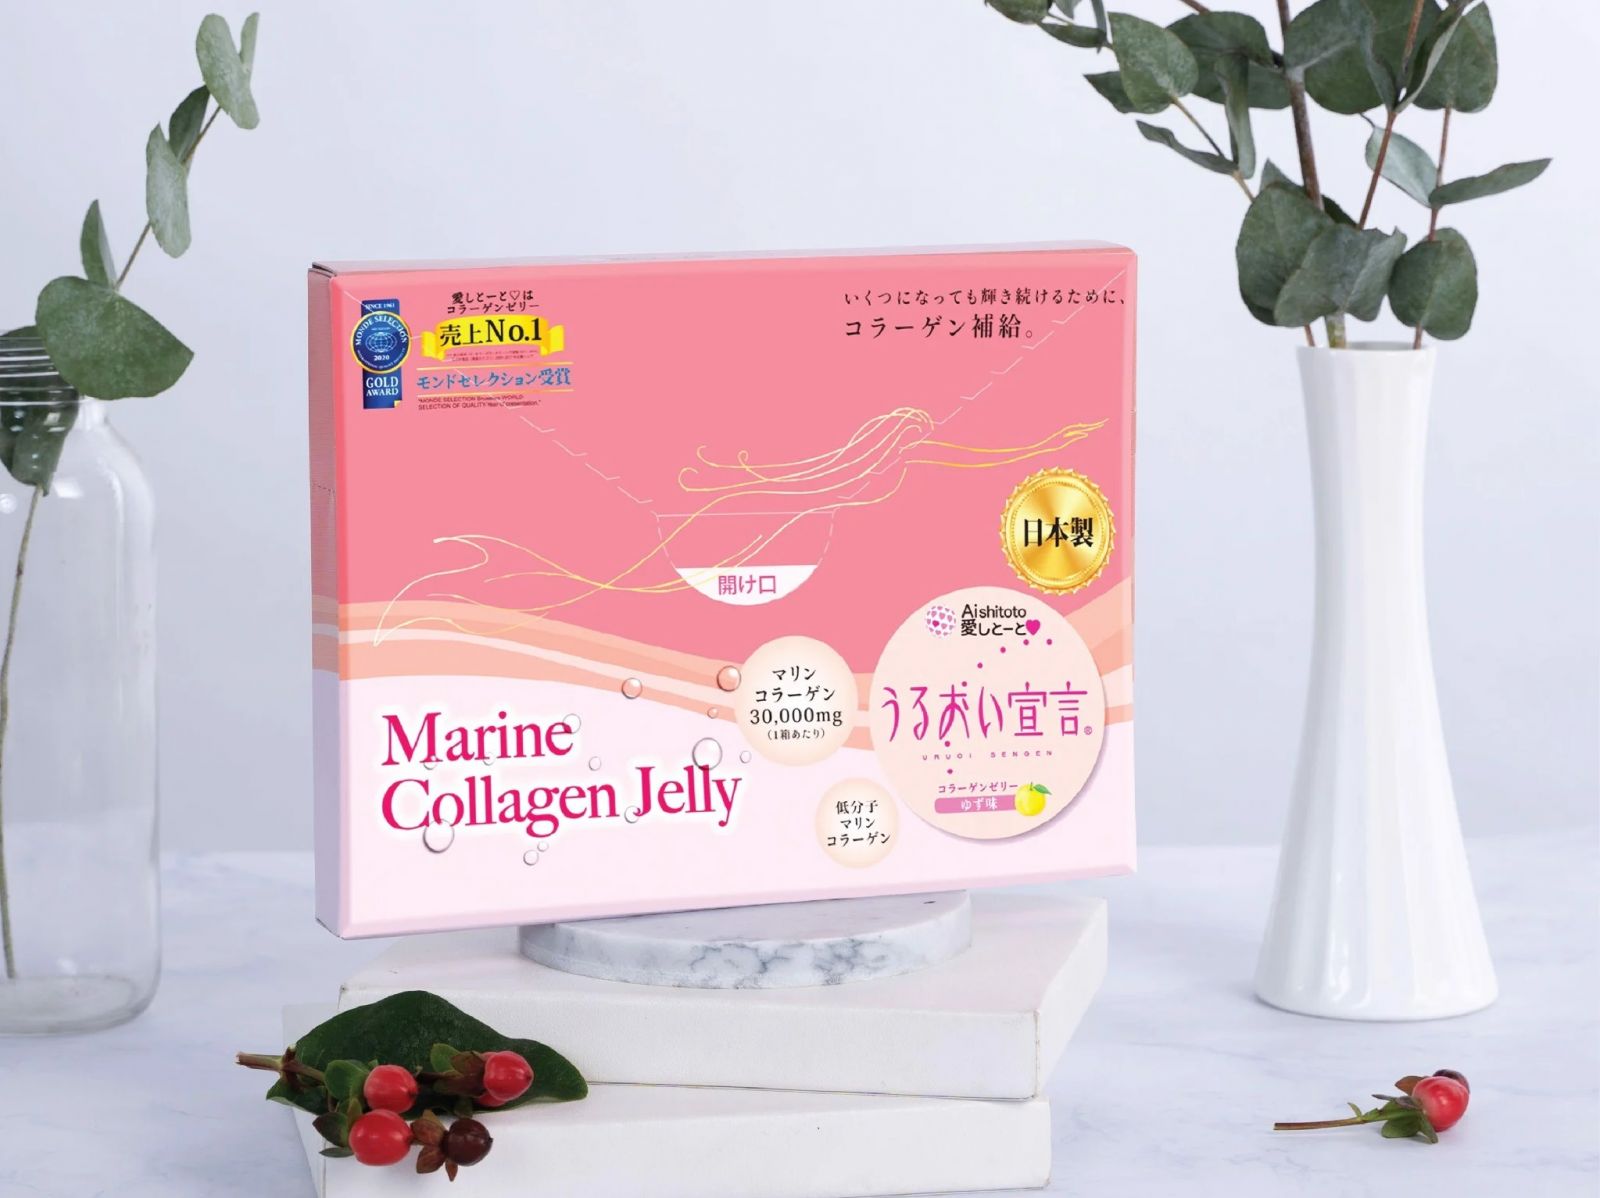 Review Chi Tiết Thạch Collagen Aishitoto Collagen Jelly Nhật Bản. Ảnh 2